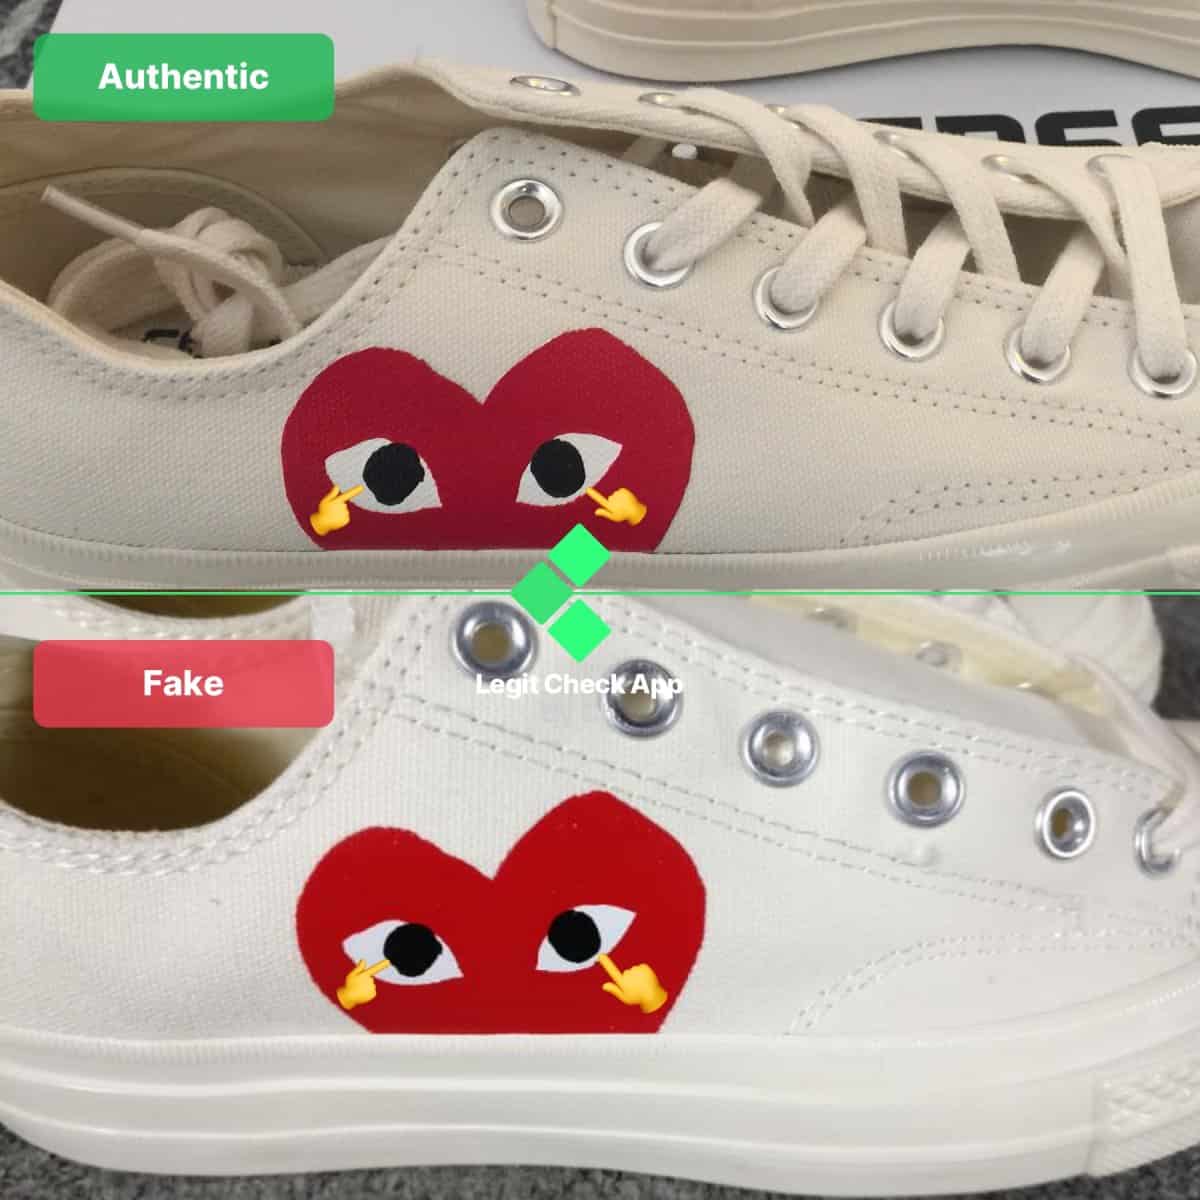 How To Spot Fake Comme Des Garcons CDG 